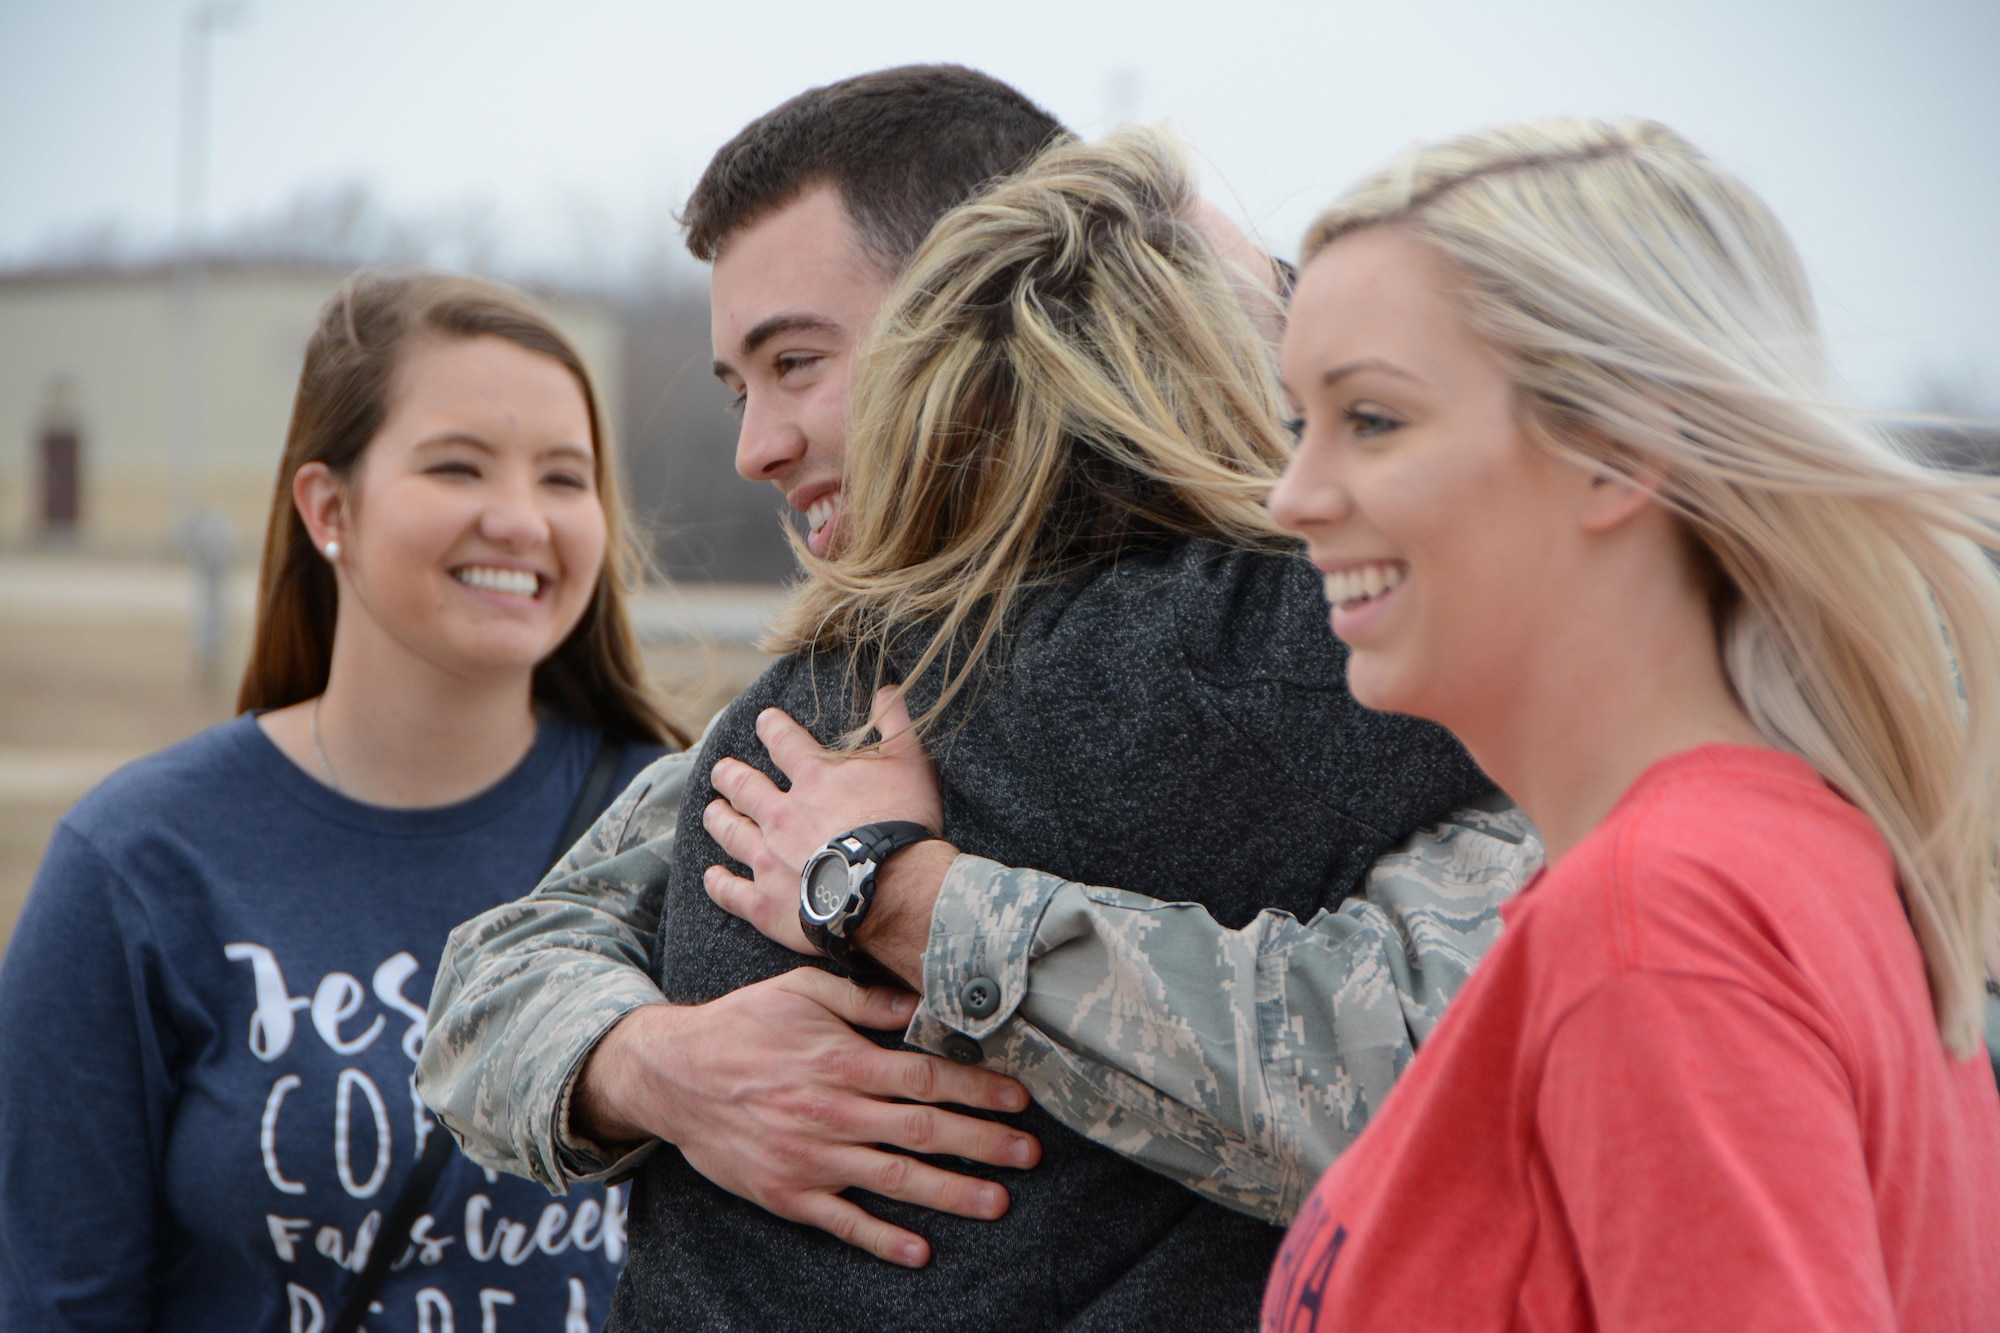 Senior Airman Tyler Franz of the 507th Operations Support Squadron hugs his family members following a deployment Feb. 19, 2017, at Tinker Air Force Base, Okla. Franz was awarded the 507th Air Refueling Wing Airman of the Year award for 2016 while he was deployed. More than 90 Reservists deployed in December 2016 in support of air operations at Incirlik Air Base, Turkey, against the Islamic State group. (U.S. Air Force photo/Tech. Sgt. Lauren Gleason)